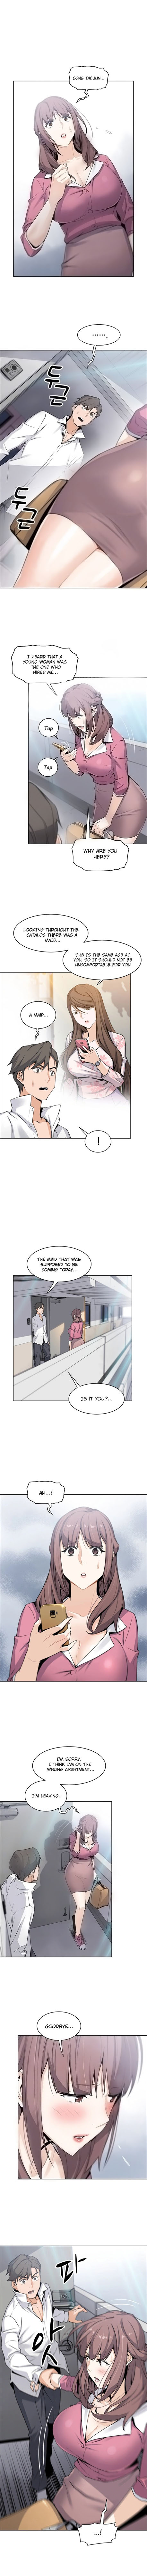 Housekeeper [Neck Pillow, Paper] Ch.49/49 [English] [Manhwa PDF] Completed